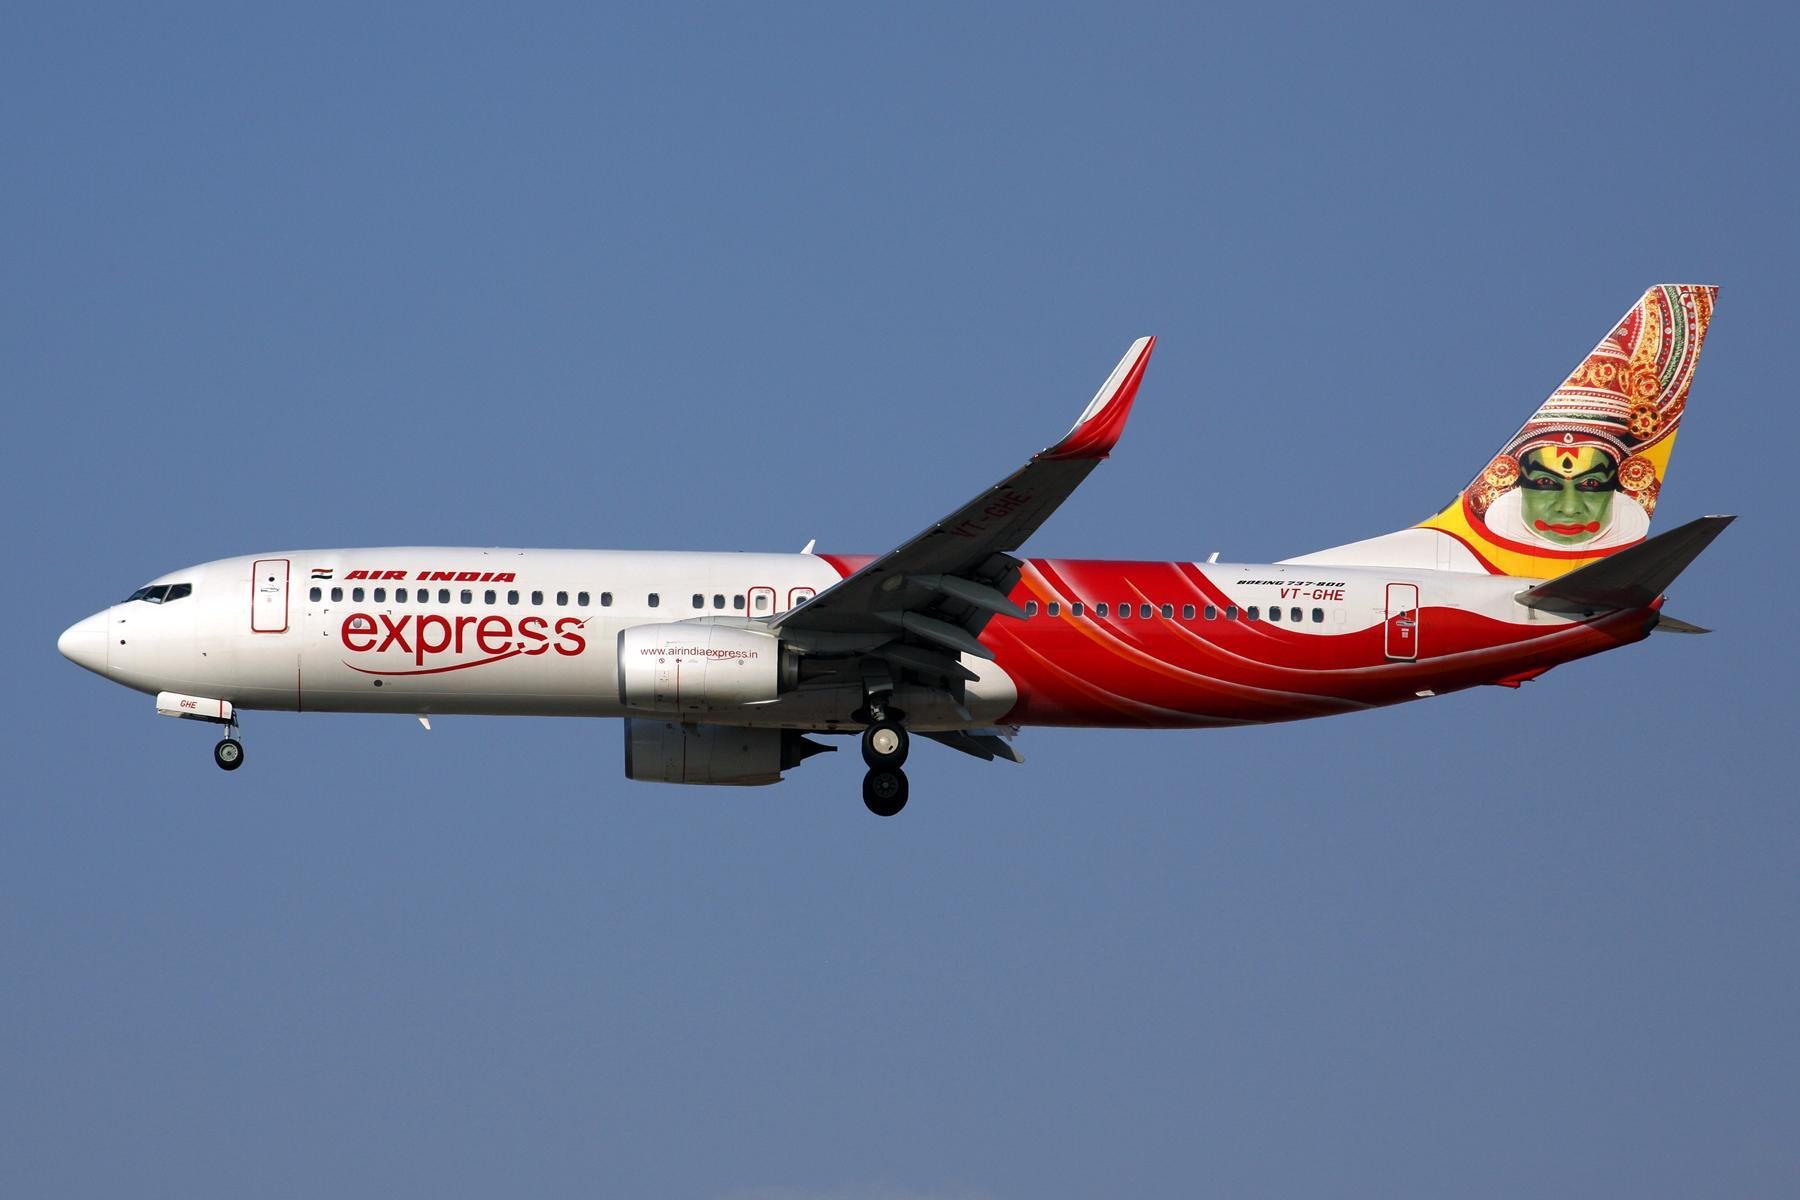 What Was The Most Significant Factor Behind The Air India Express Crash ...